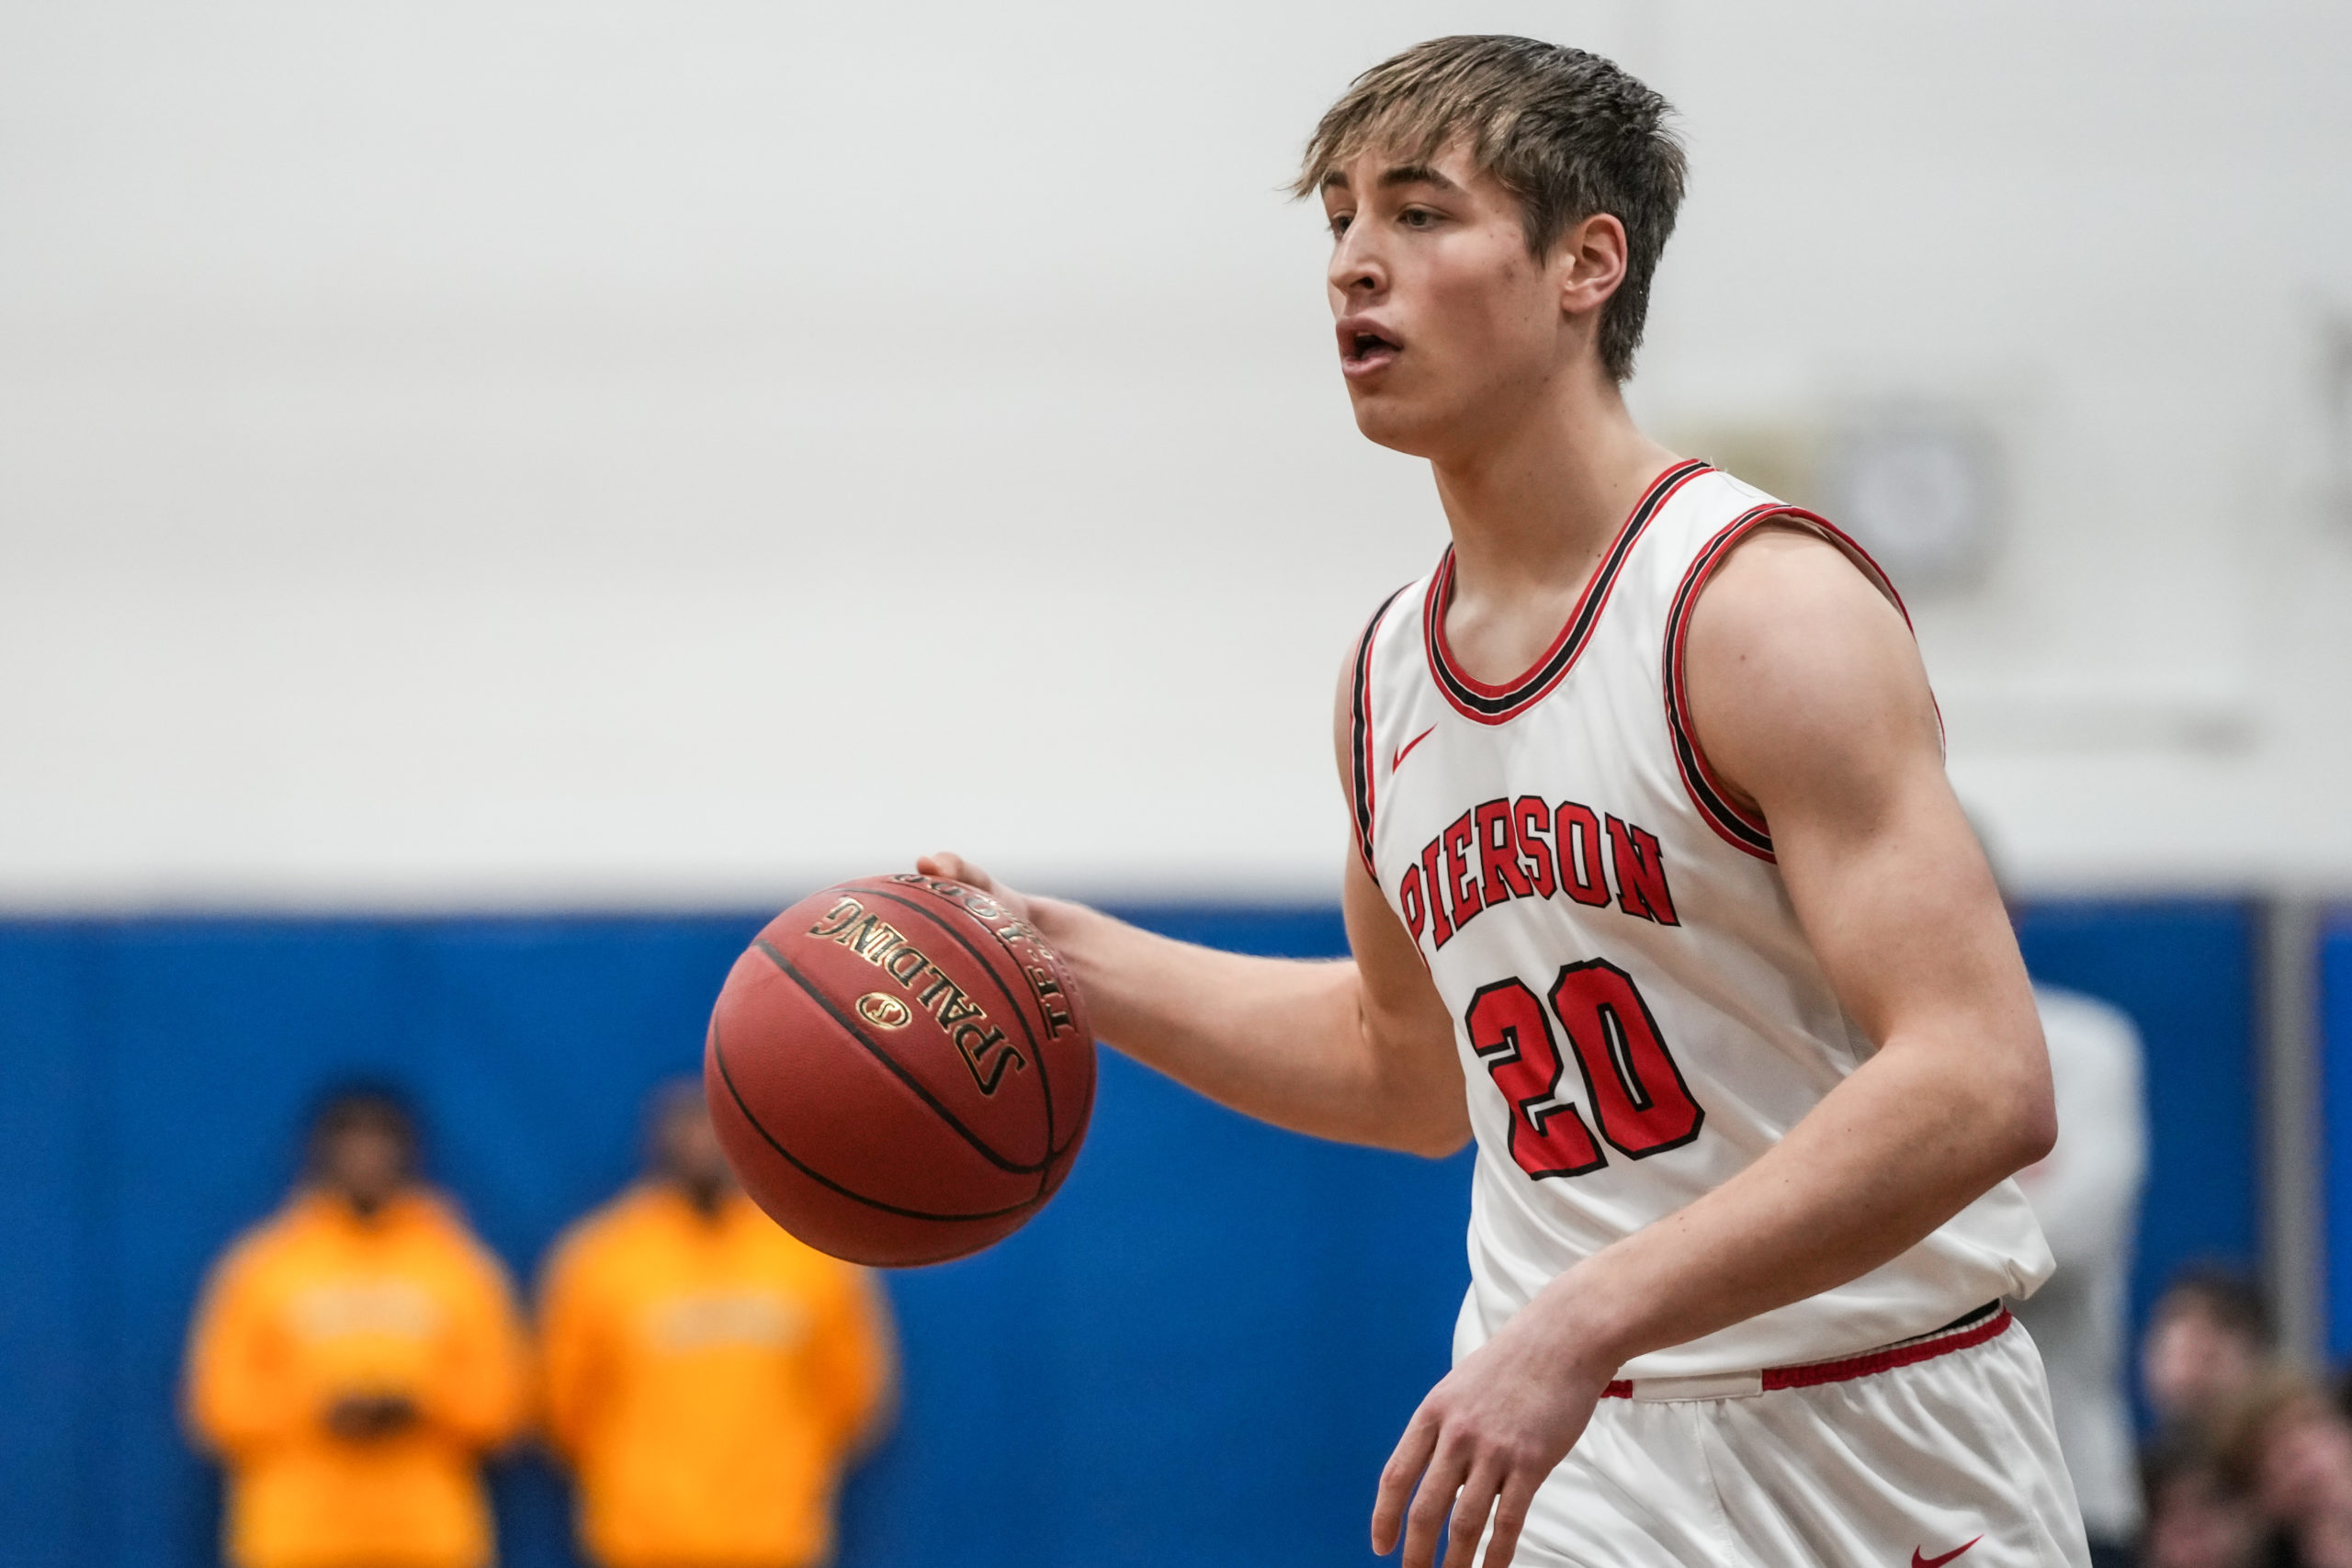 Pierson senior co-captain Cecil Munshin really turned things on the second half, scoring 12 of his 16 points in the second half with eight coming in the fourth quarter.   RON ESPOSITO